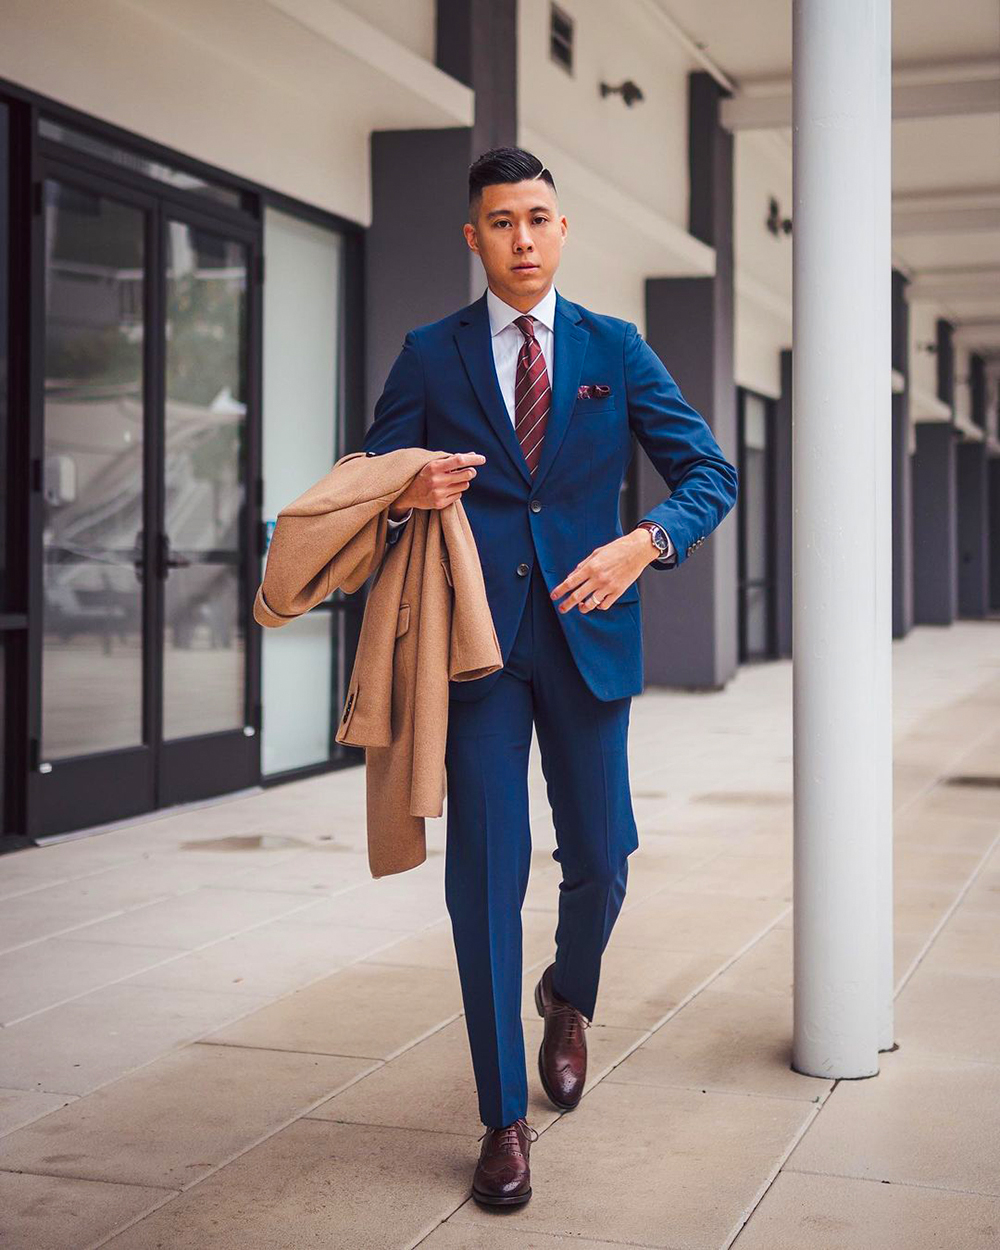 Camel overcoat, blue suit, red tie, dark brown brogues outfit